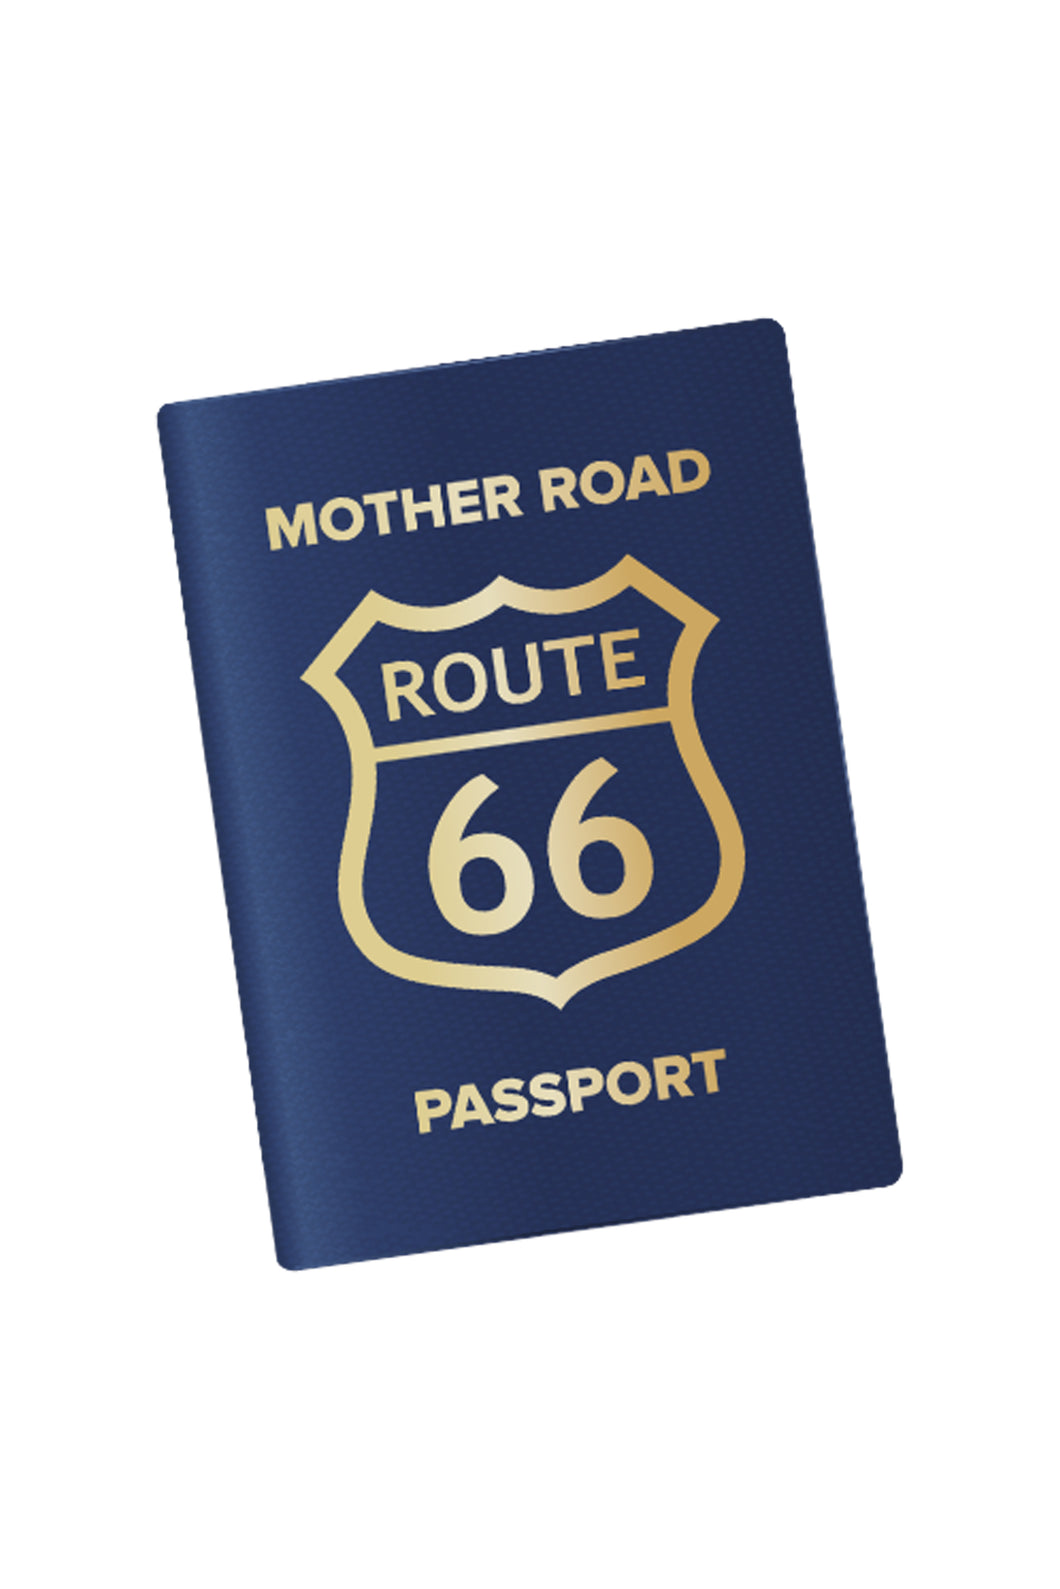 AVAILABLE! NEW Edition Route 66 Passport + FREE USA SHIPPING